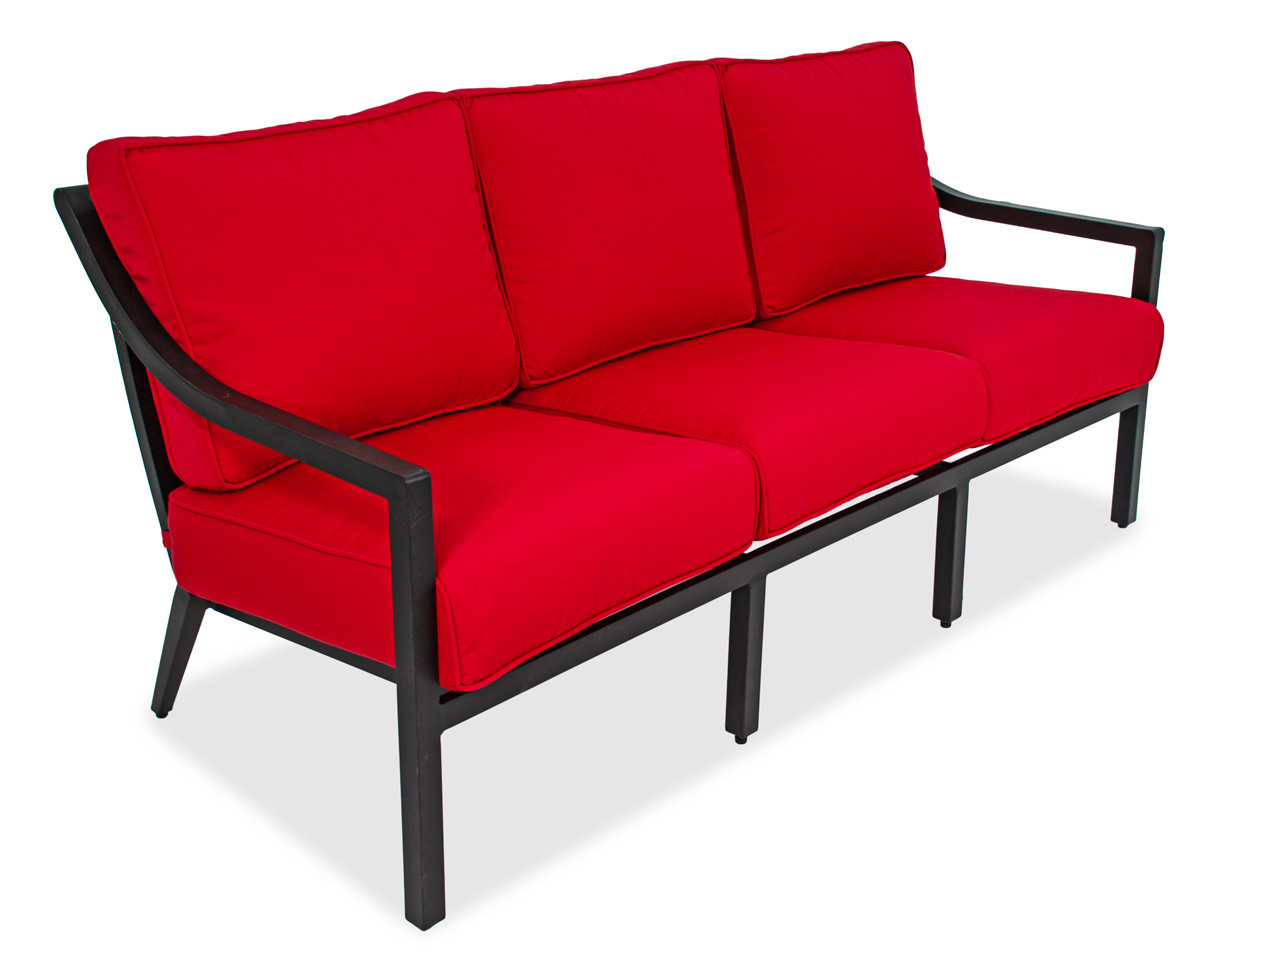 Hill Country Aged Bronze Aluminum and Jockey Red Cushion 4 Pc. Sofa Group with 48 x 28 in. Coffee Table